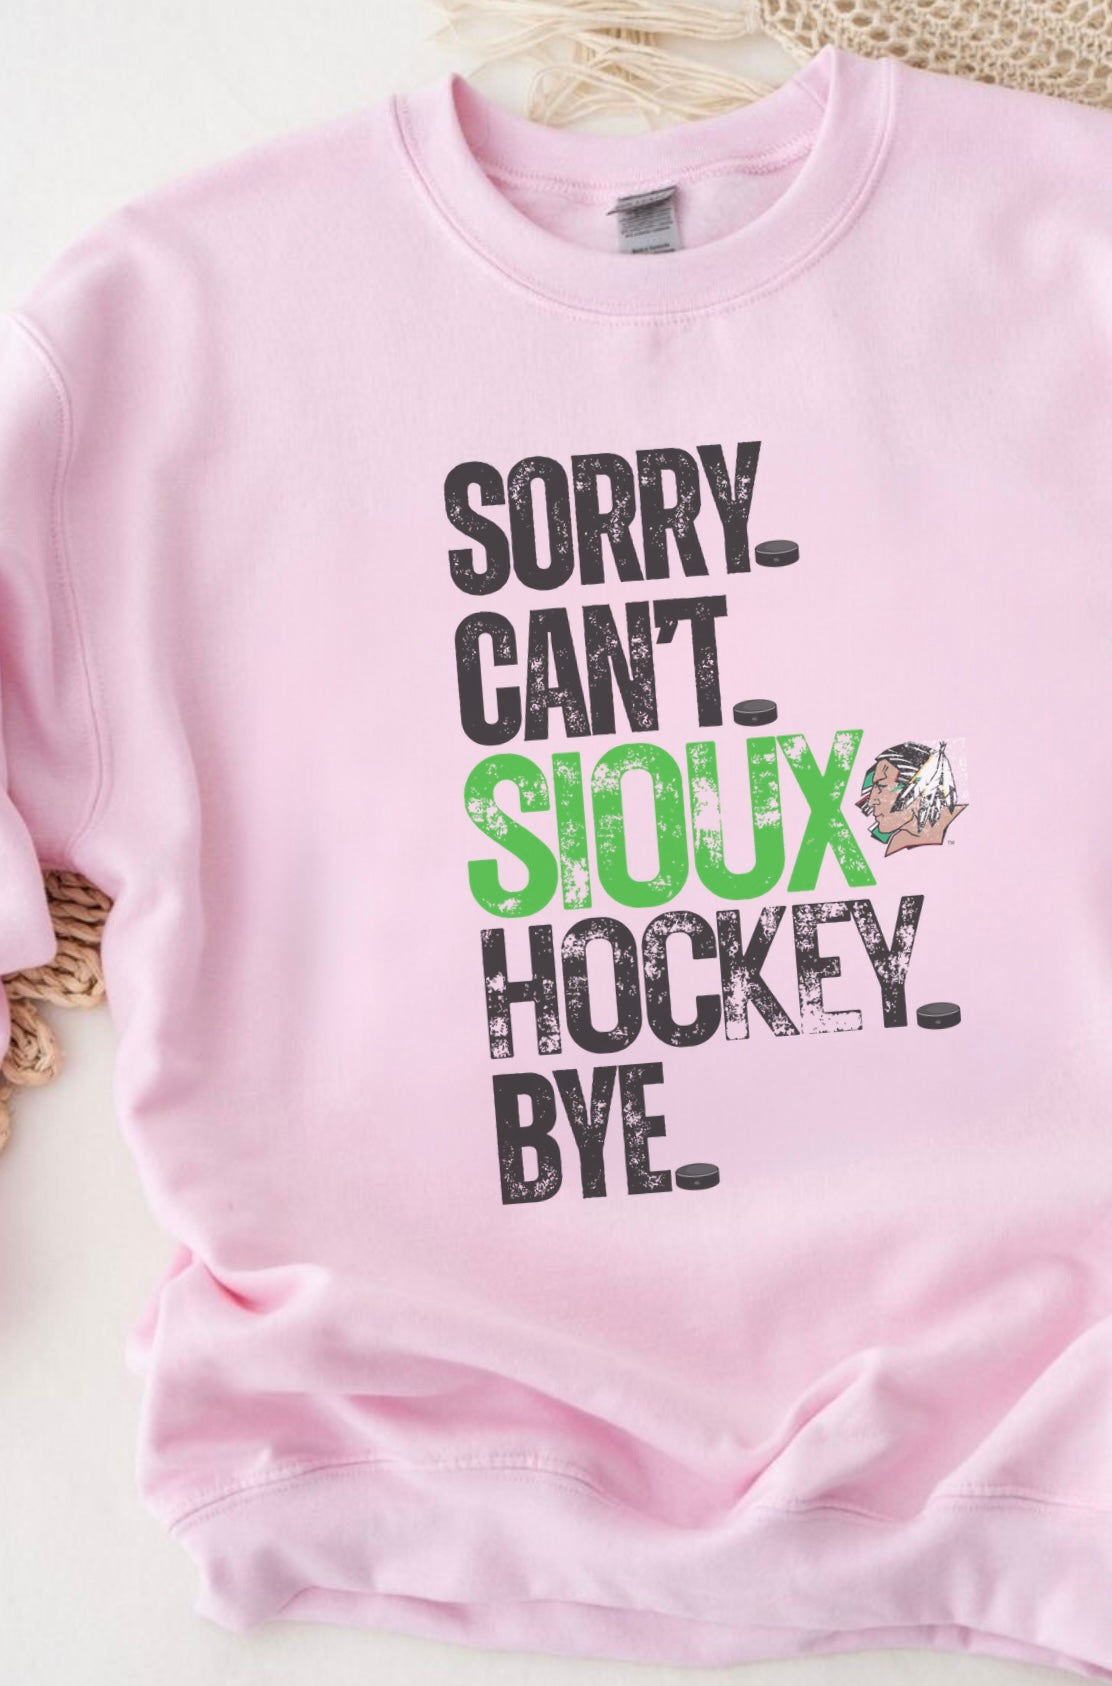 Sorry Can’t Sioux Hockey Bye